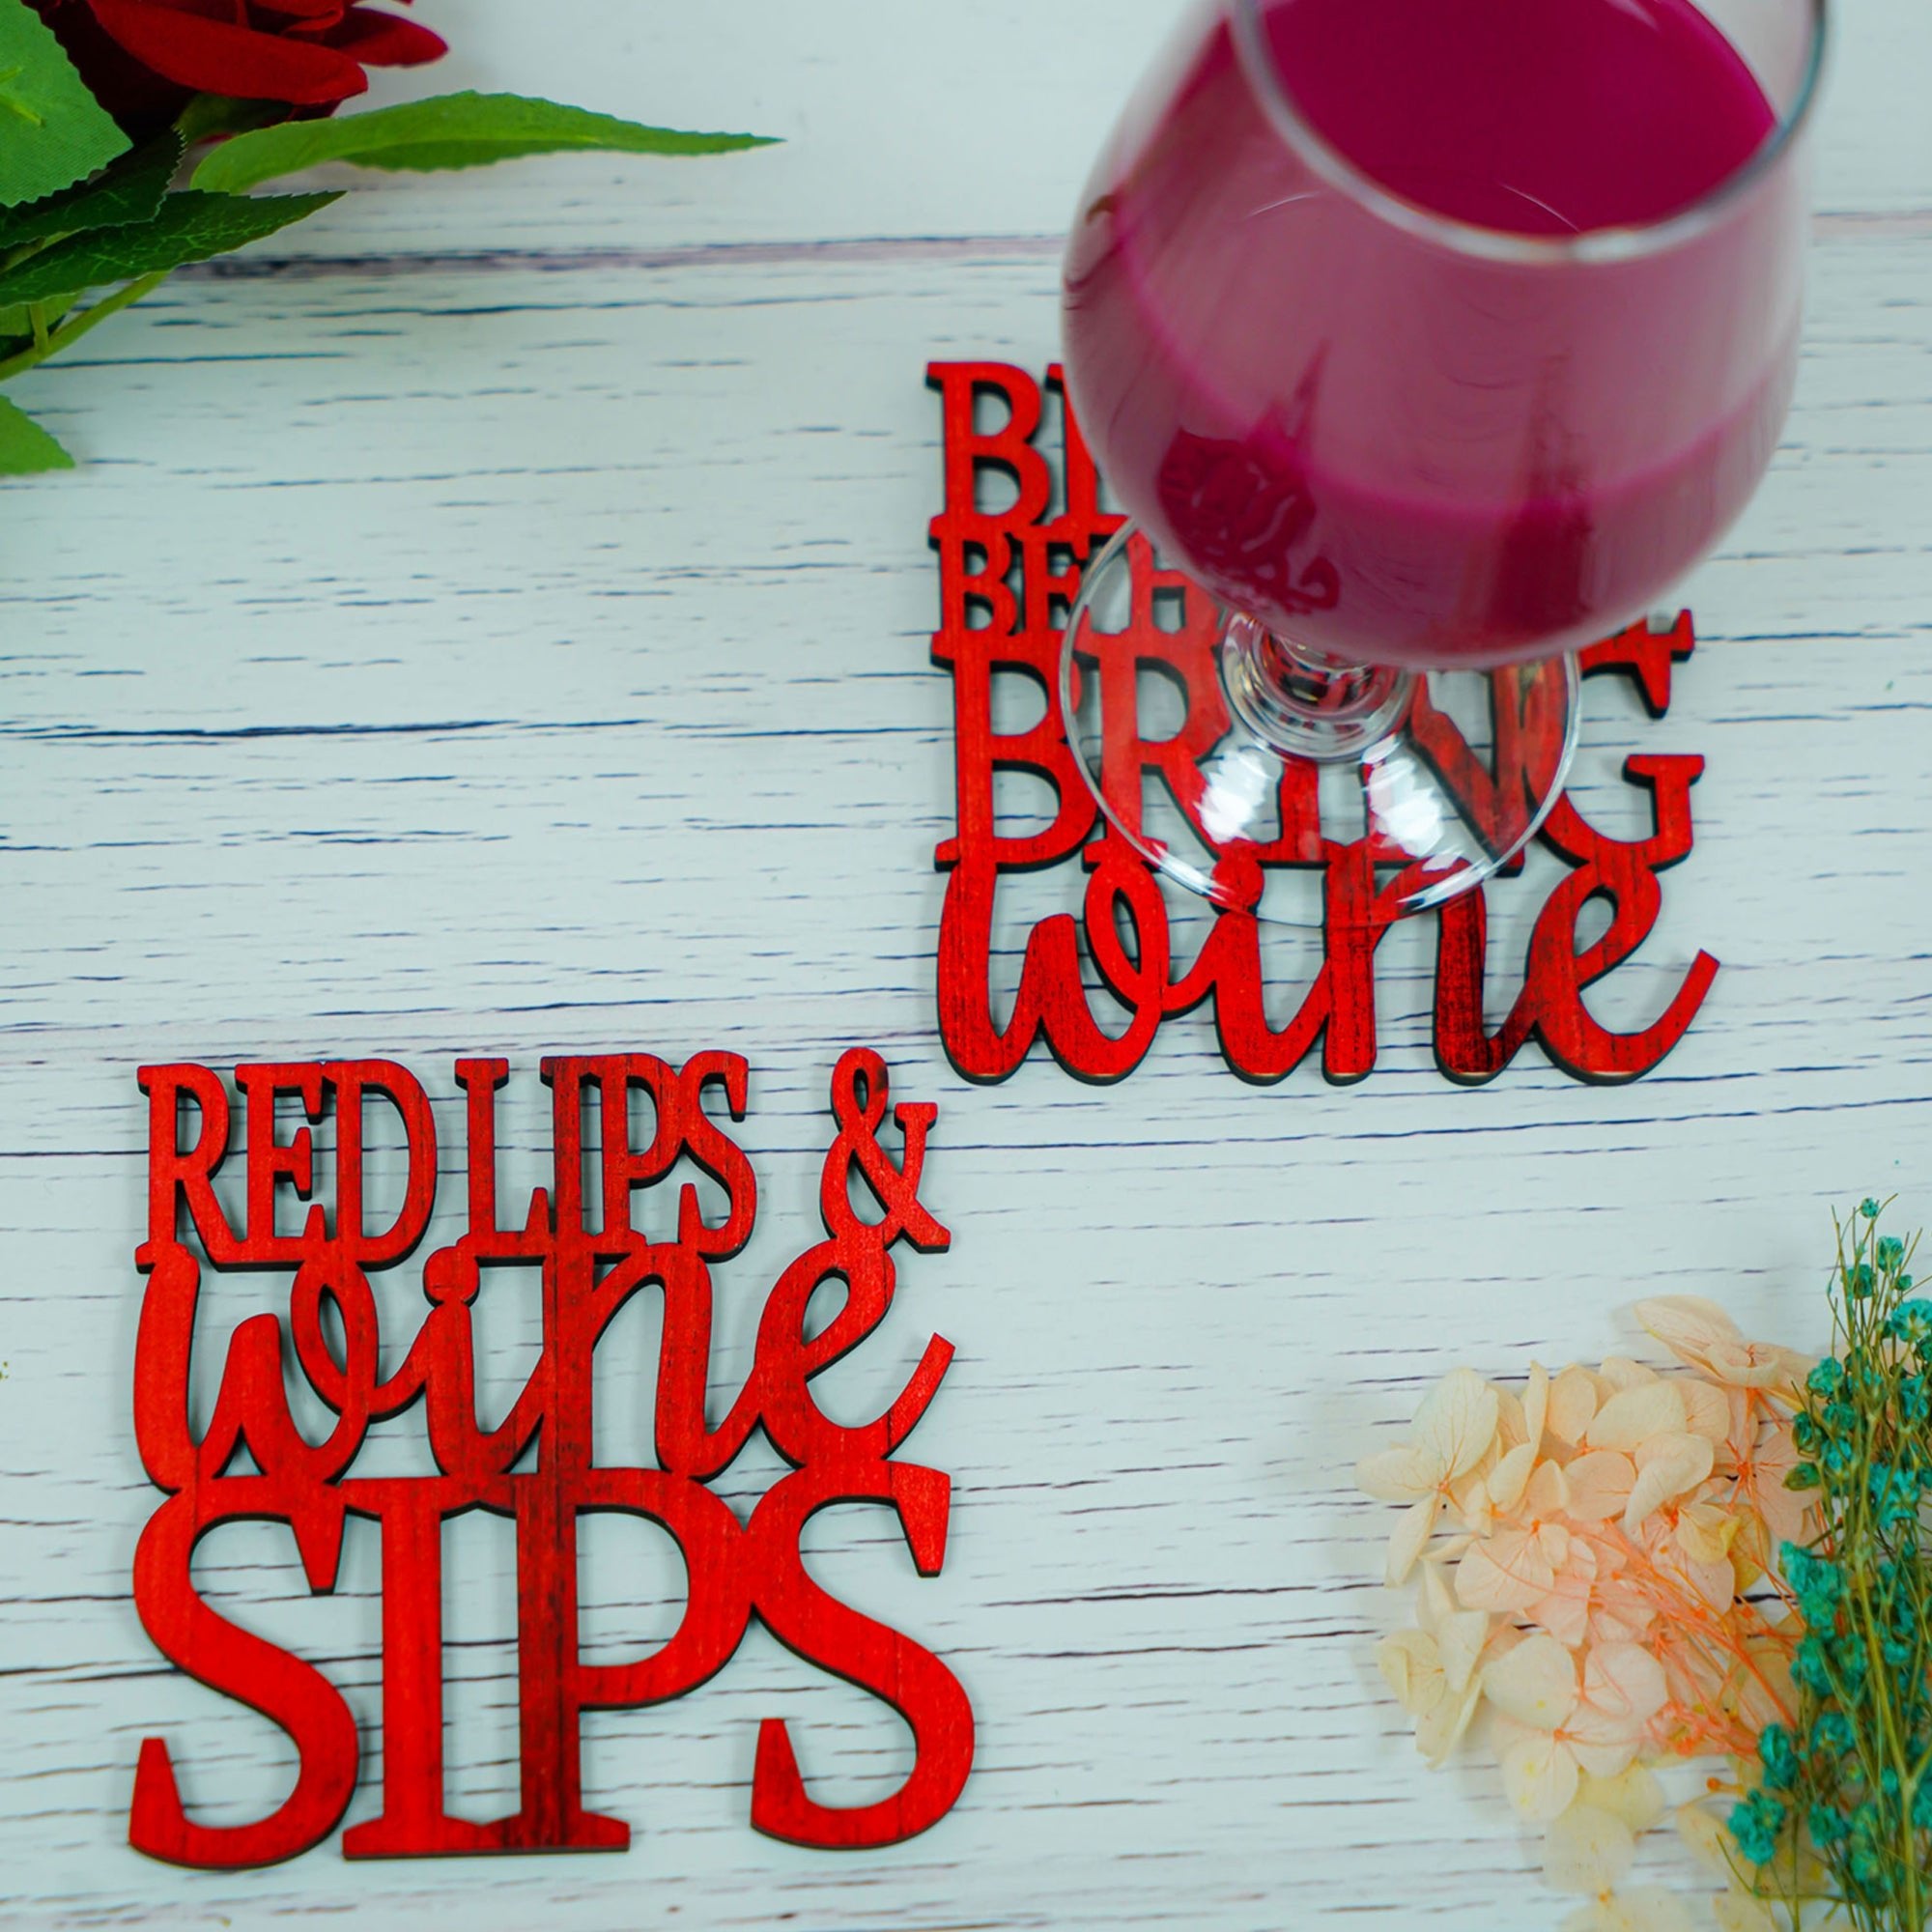 Red Lips and wine sips creative wine coaster